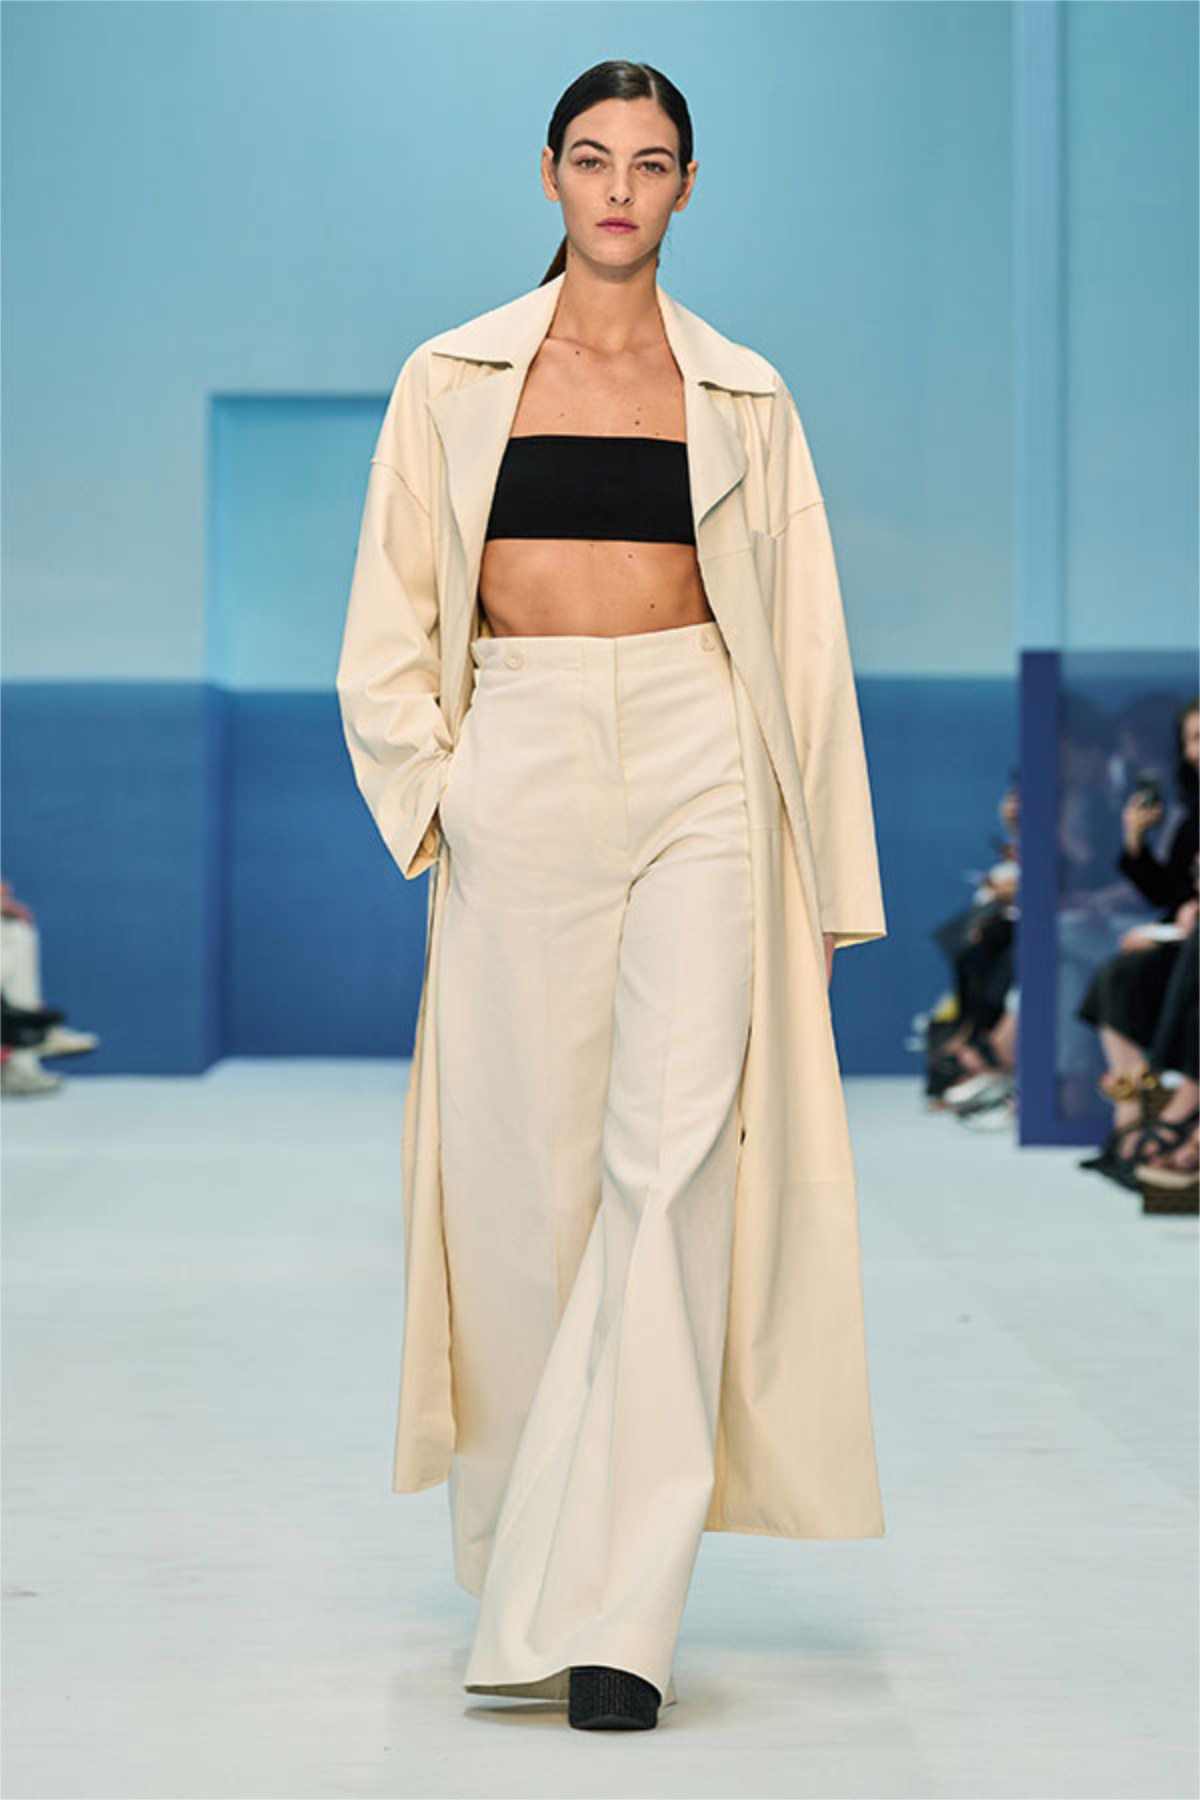 Max Mara Presents Its New Spring Summer 2023 Collection - The Blue Horizon